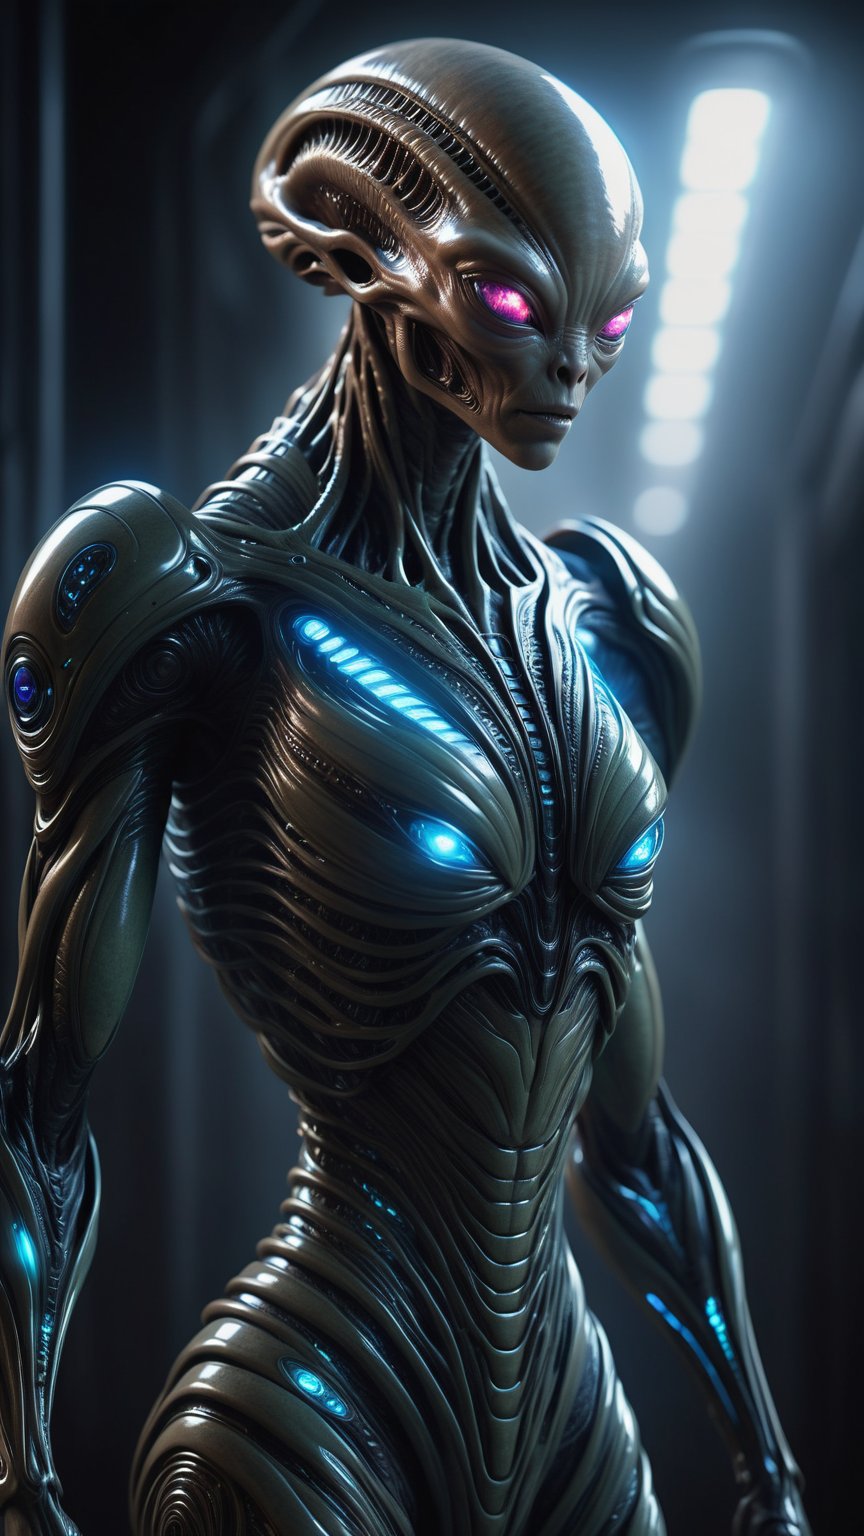 woman Create a spine-chilling image of an alien creature adorned in Hi-Tech biometric glowing armor, radiating a deadly and intimidating aura. Showcase the alien's otherworldly features and cutting-edge technology, resulting in a mesmerizing and frightening visual narrative. ((Full body)), 